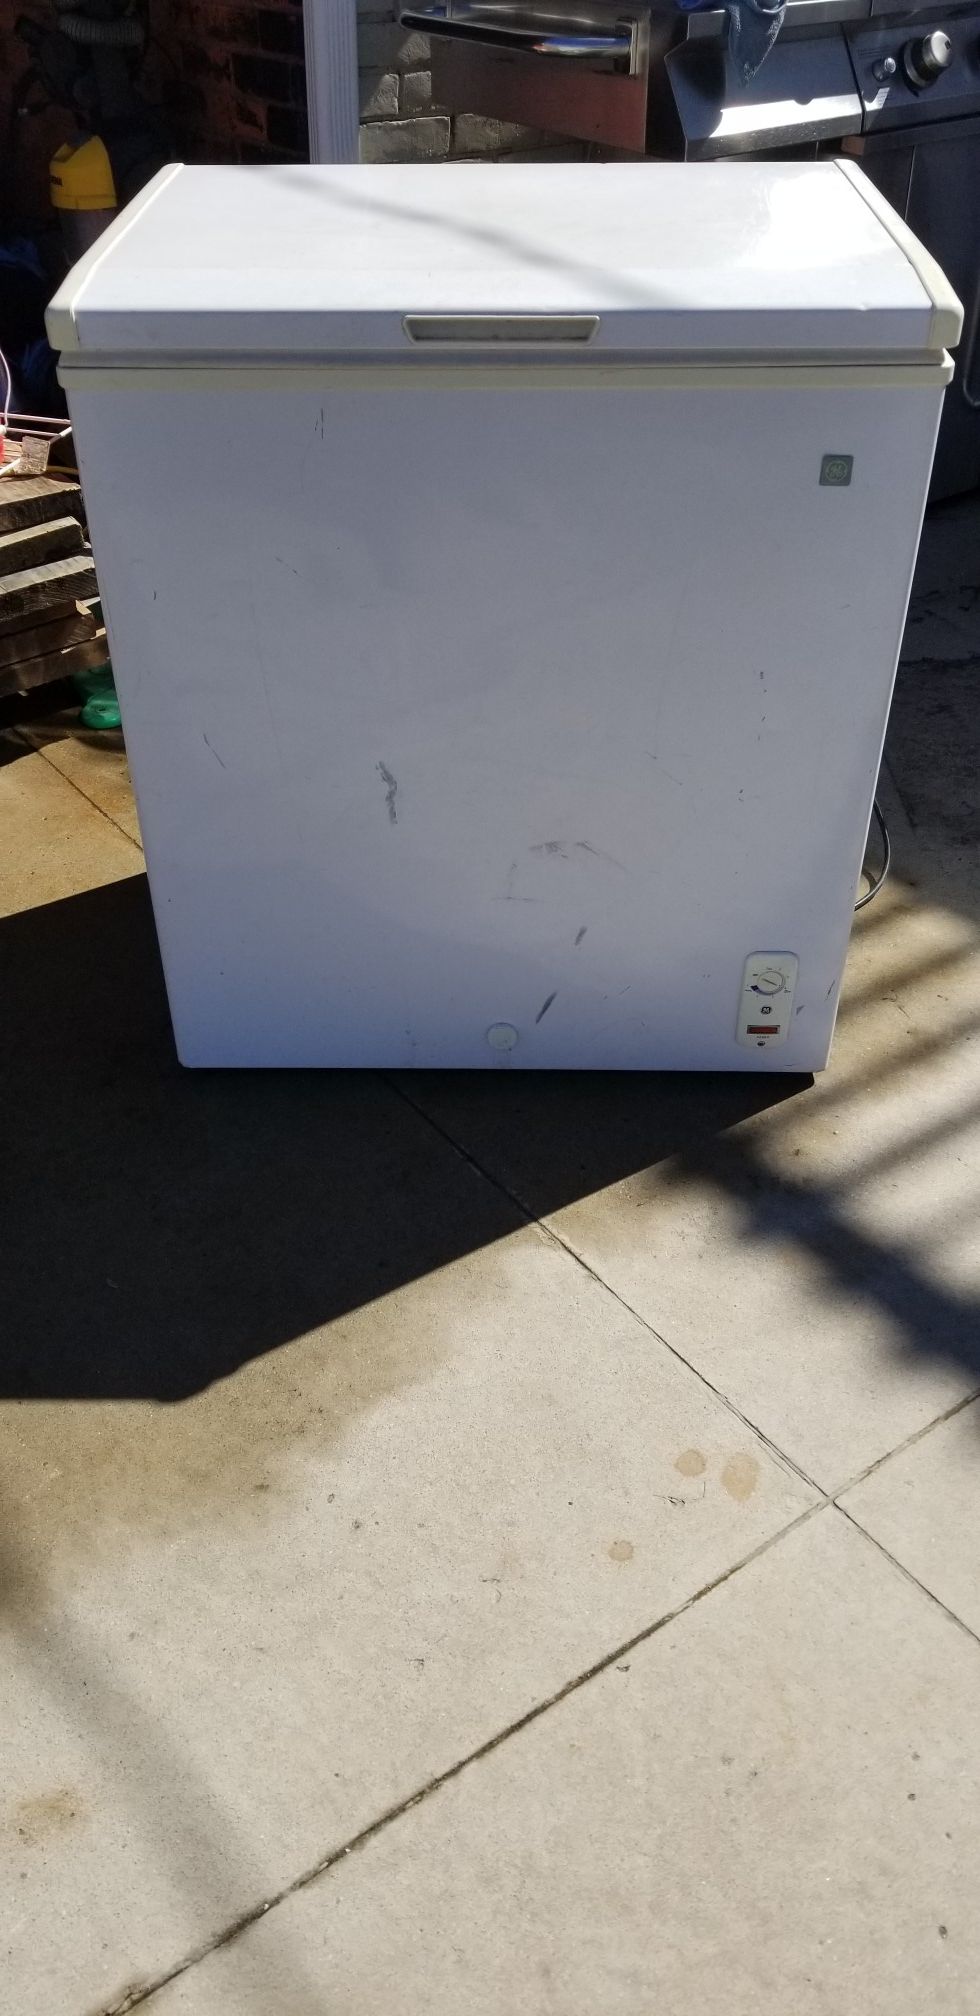 Freezer in good condition, has a couple of scratches.